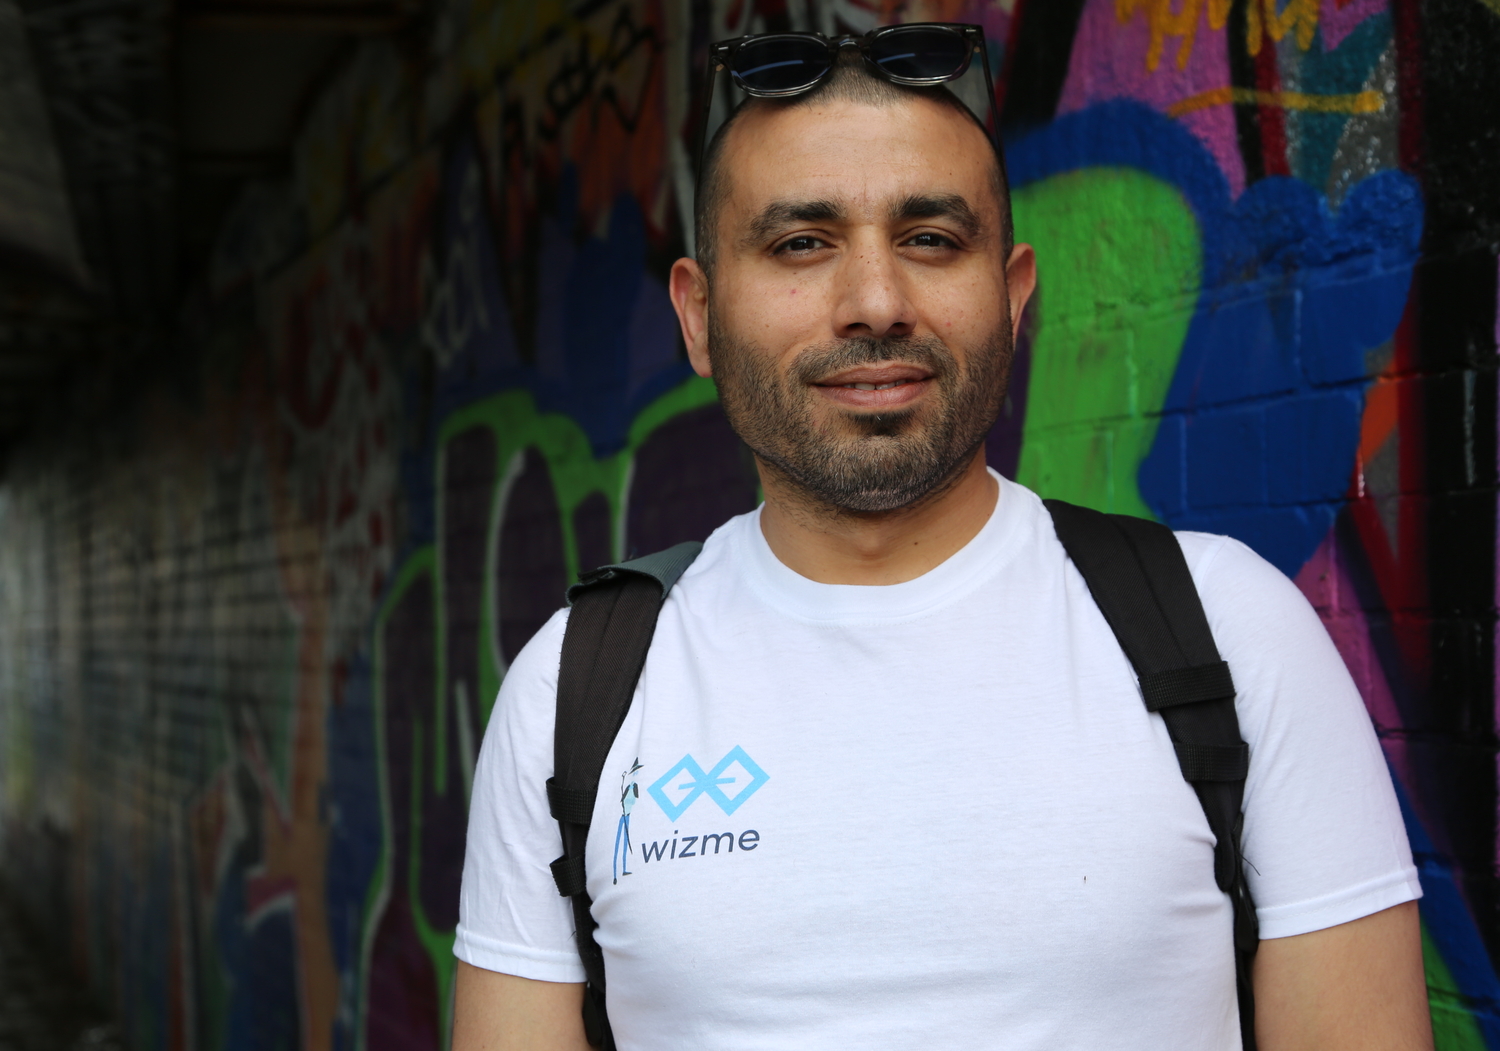 Despite the complexity of building a business as a refugee and a sole founder, with the challenges of COVID on top of that, Nour Mouakke's hard work and dedication has seen Wizme grow into a successful business.